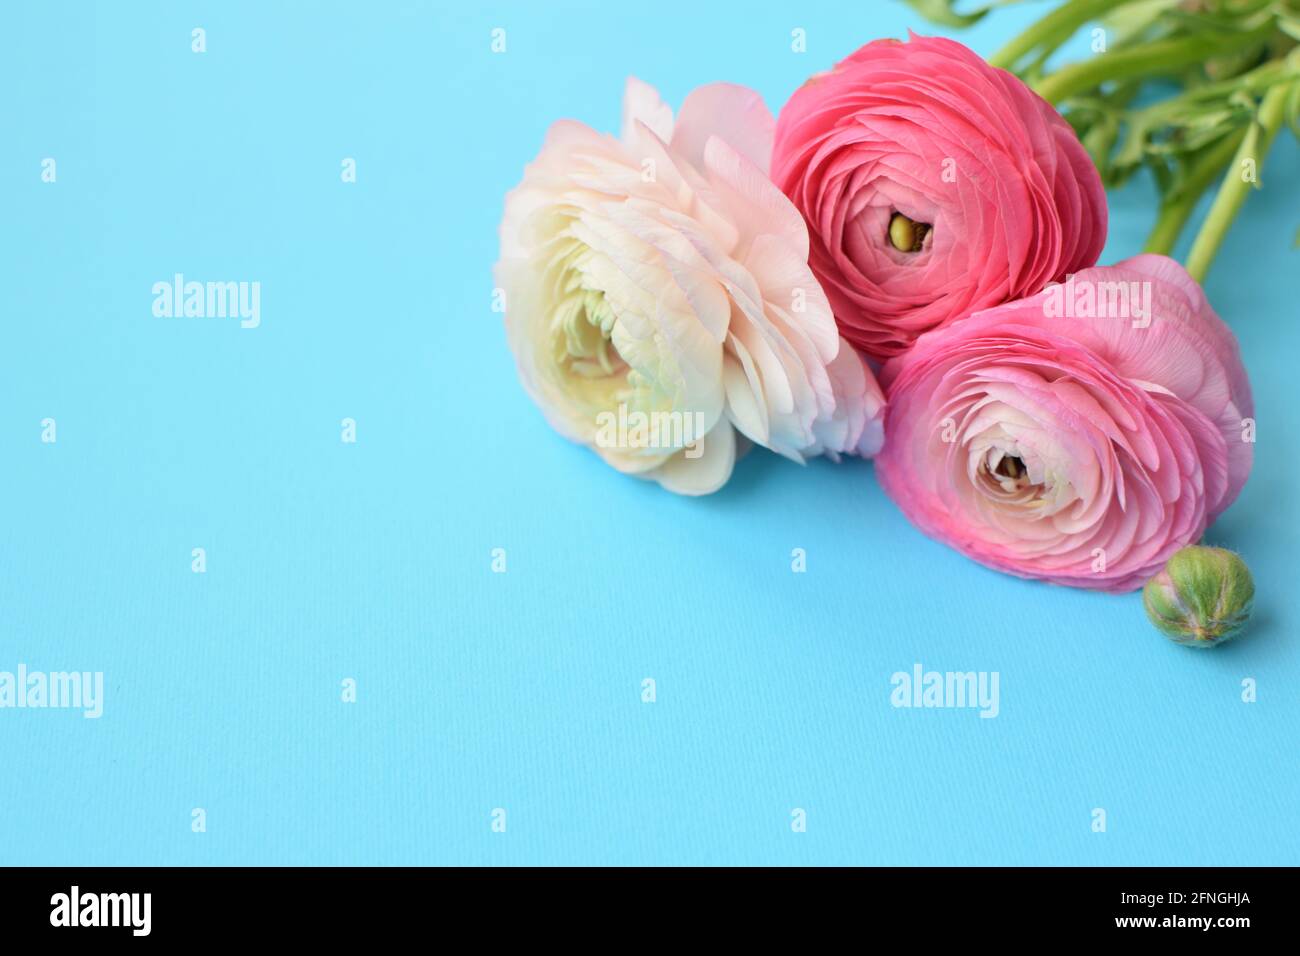 Beautiful bouquet of pink ranunculus flowers on a blue background. Flowers buttercup. Copy space for text Stock Photo